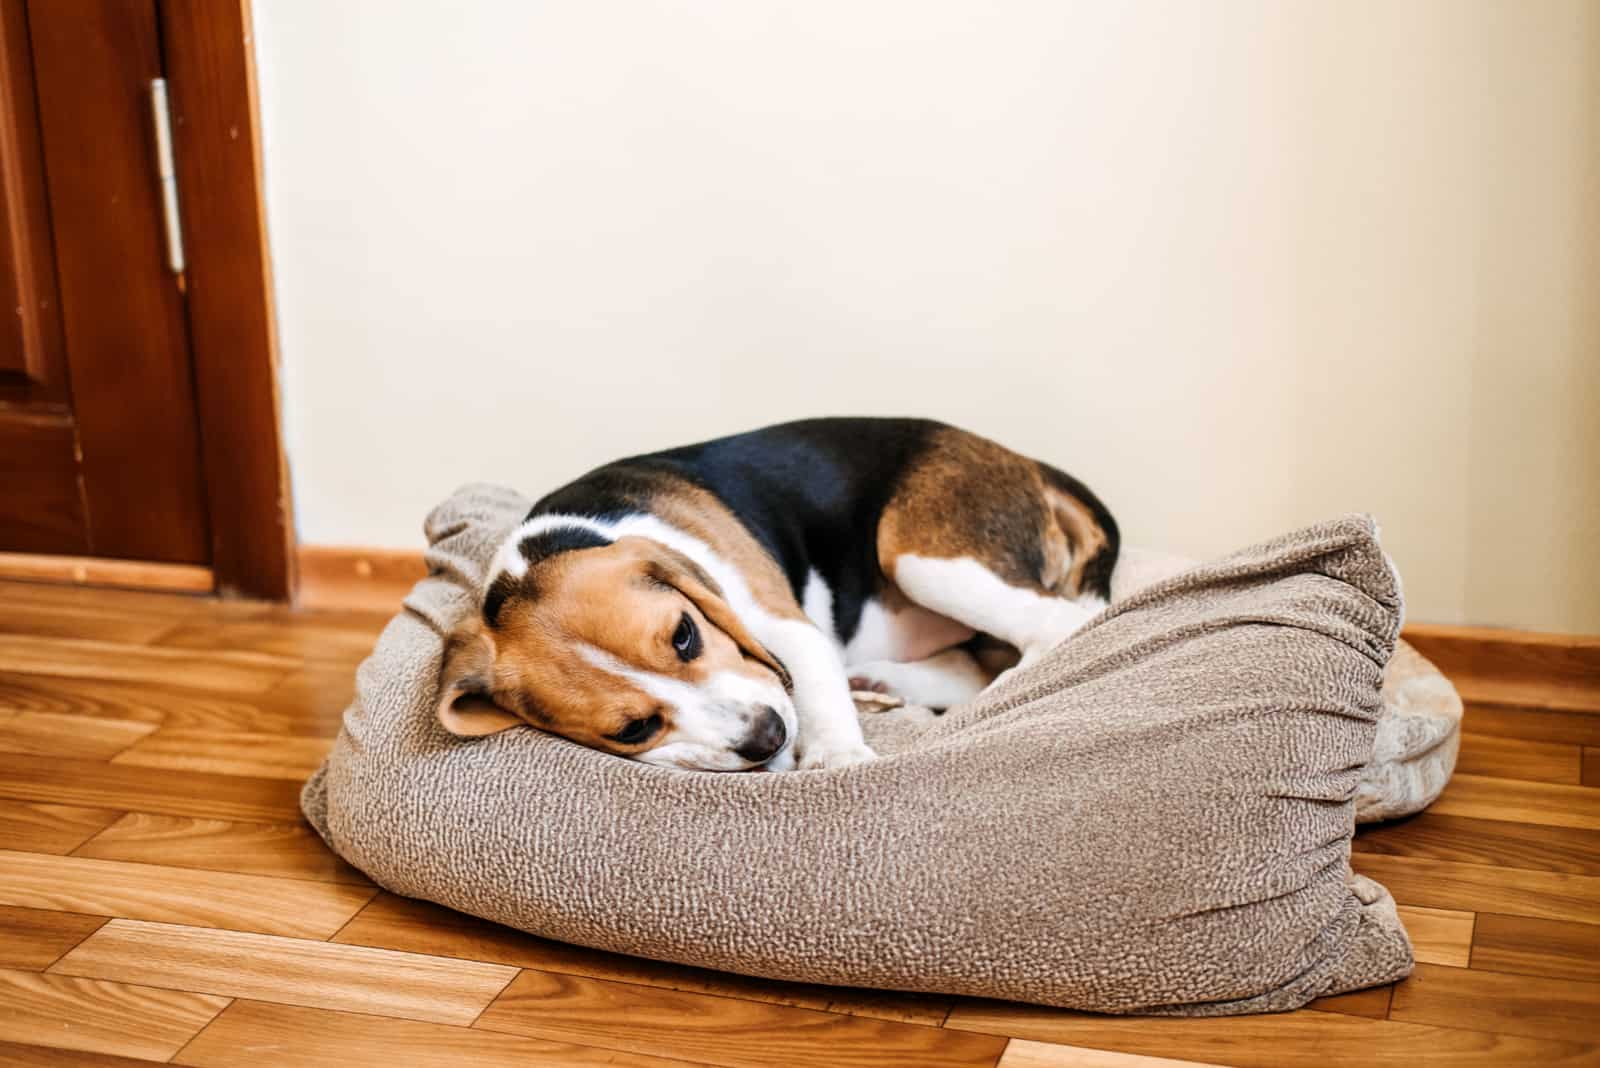 Sick Beagle Puppy is lying on dog bed on the floor